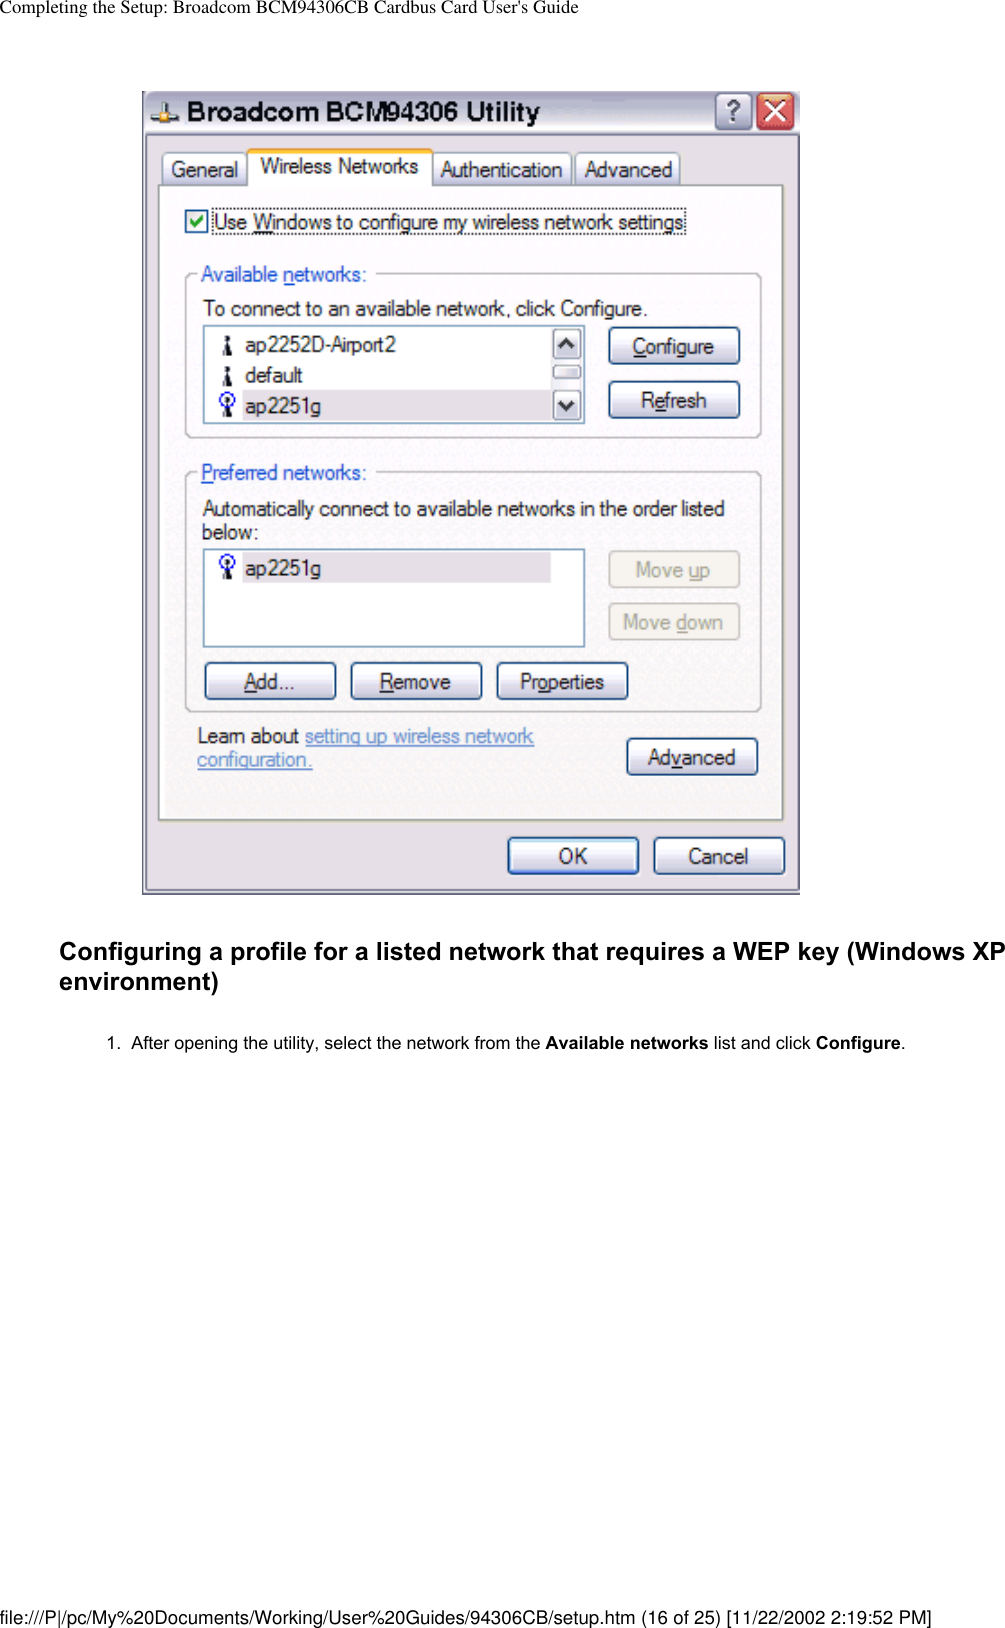 Completing the Setup: Broadcom BCM94306CB Cardbus Card User&apos;s GuideConfiguring a profile for a listed network that requires a WEP key (Windows XP environment)1.  After opening the utility, select the network from the Available networks list and click Configure. file:///P|/pc/My%20Documents/Working/User%20Guides/94306CB/setup.htm (16 of 25) [11/22/2002 2:19:52 PM]